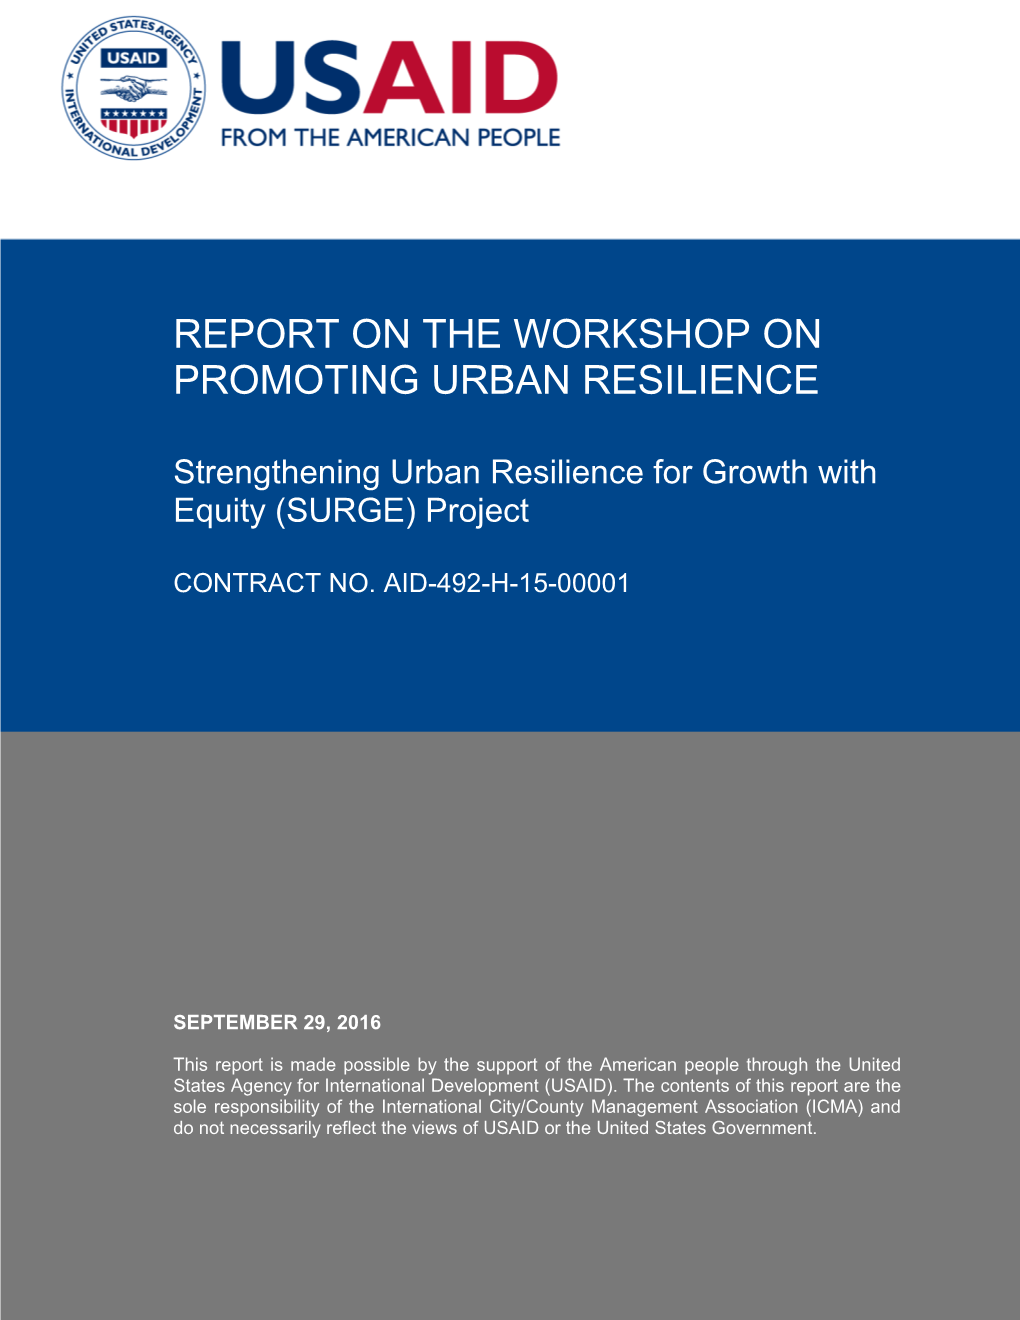 Report on the Workshop on Promoting Urban Resilience